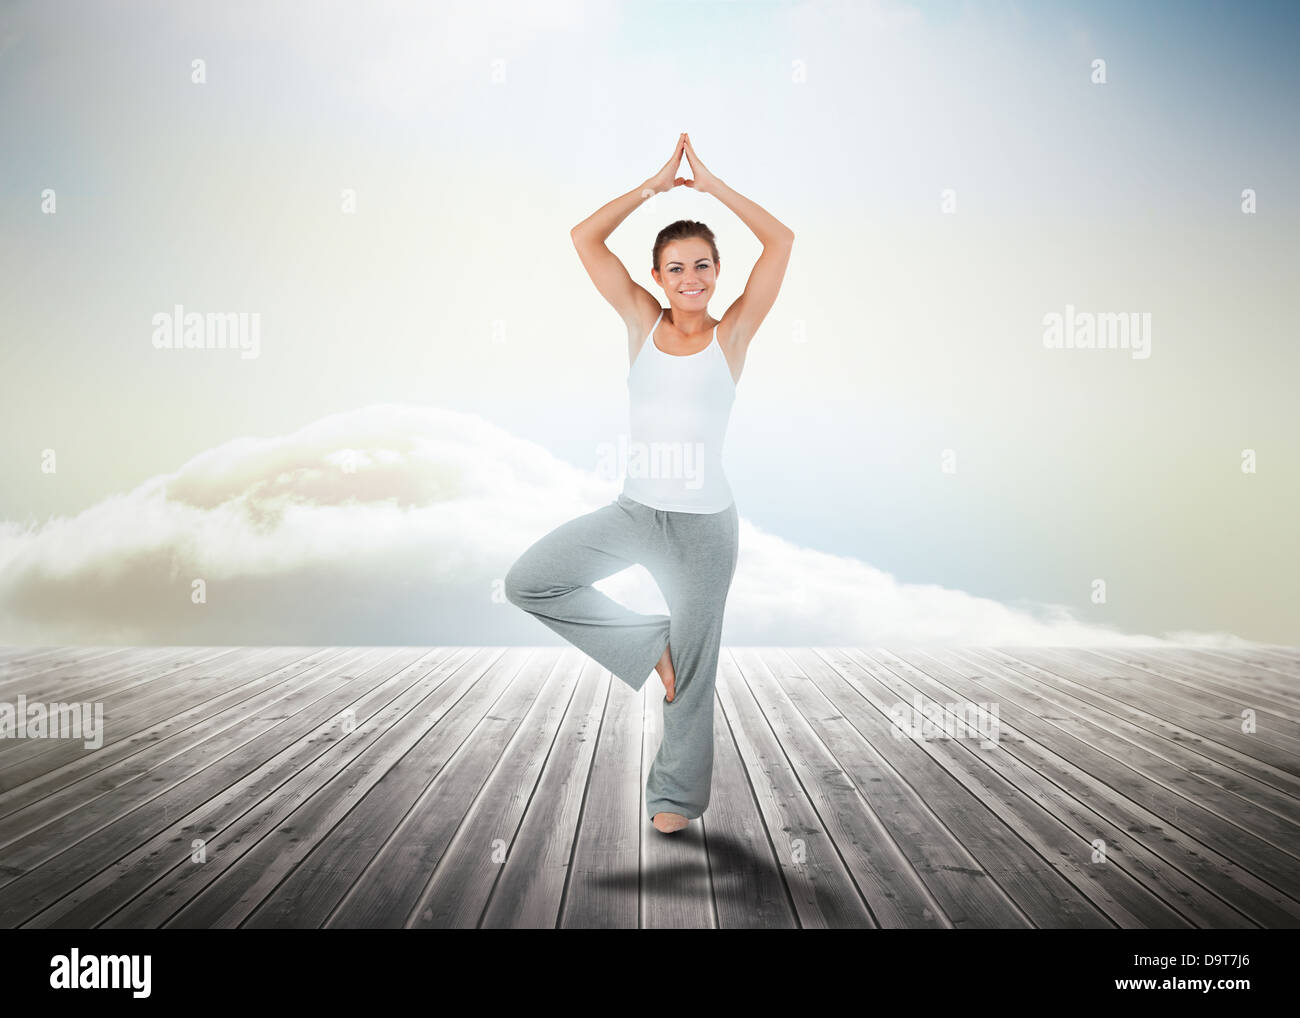 Woman practicing yoga over wooden boards Stock Photo